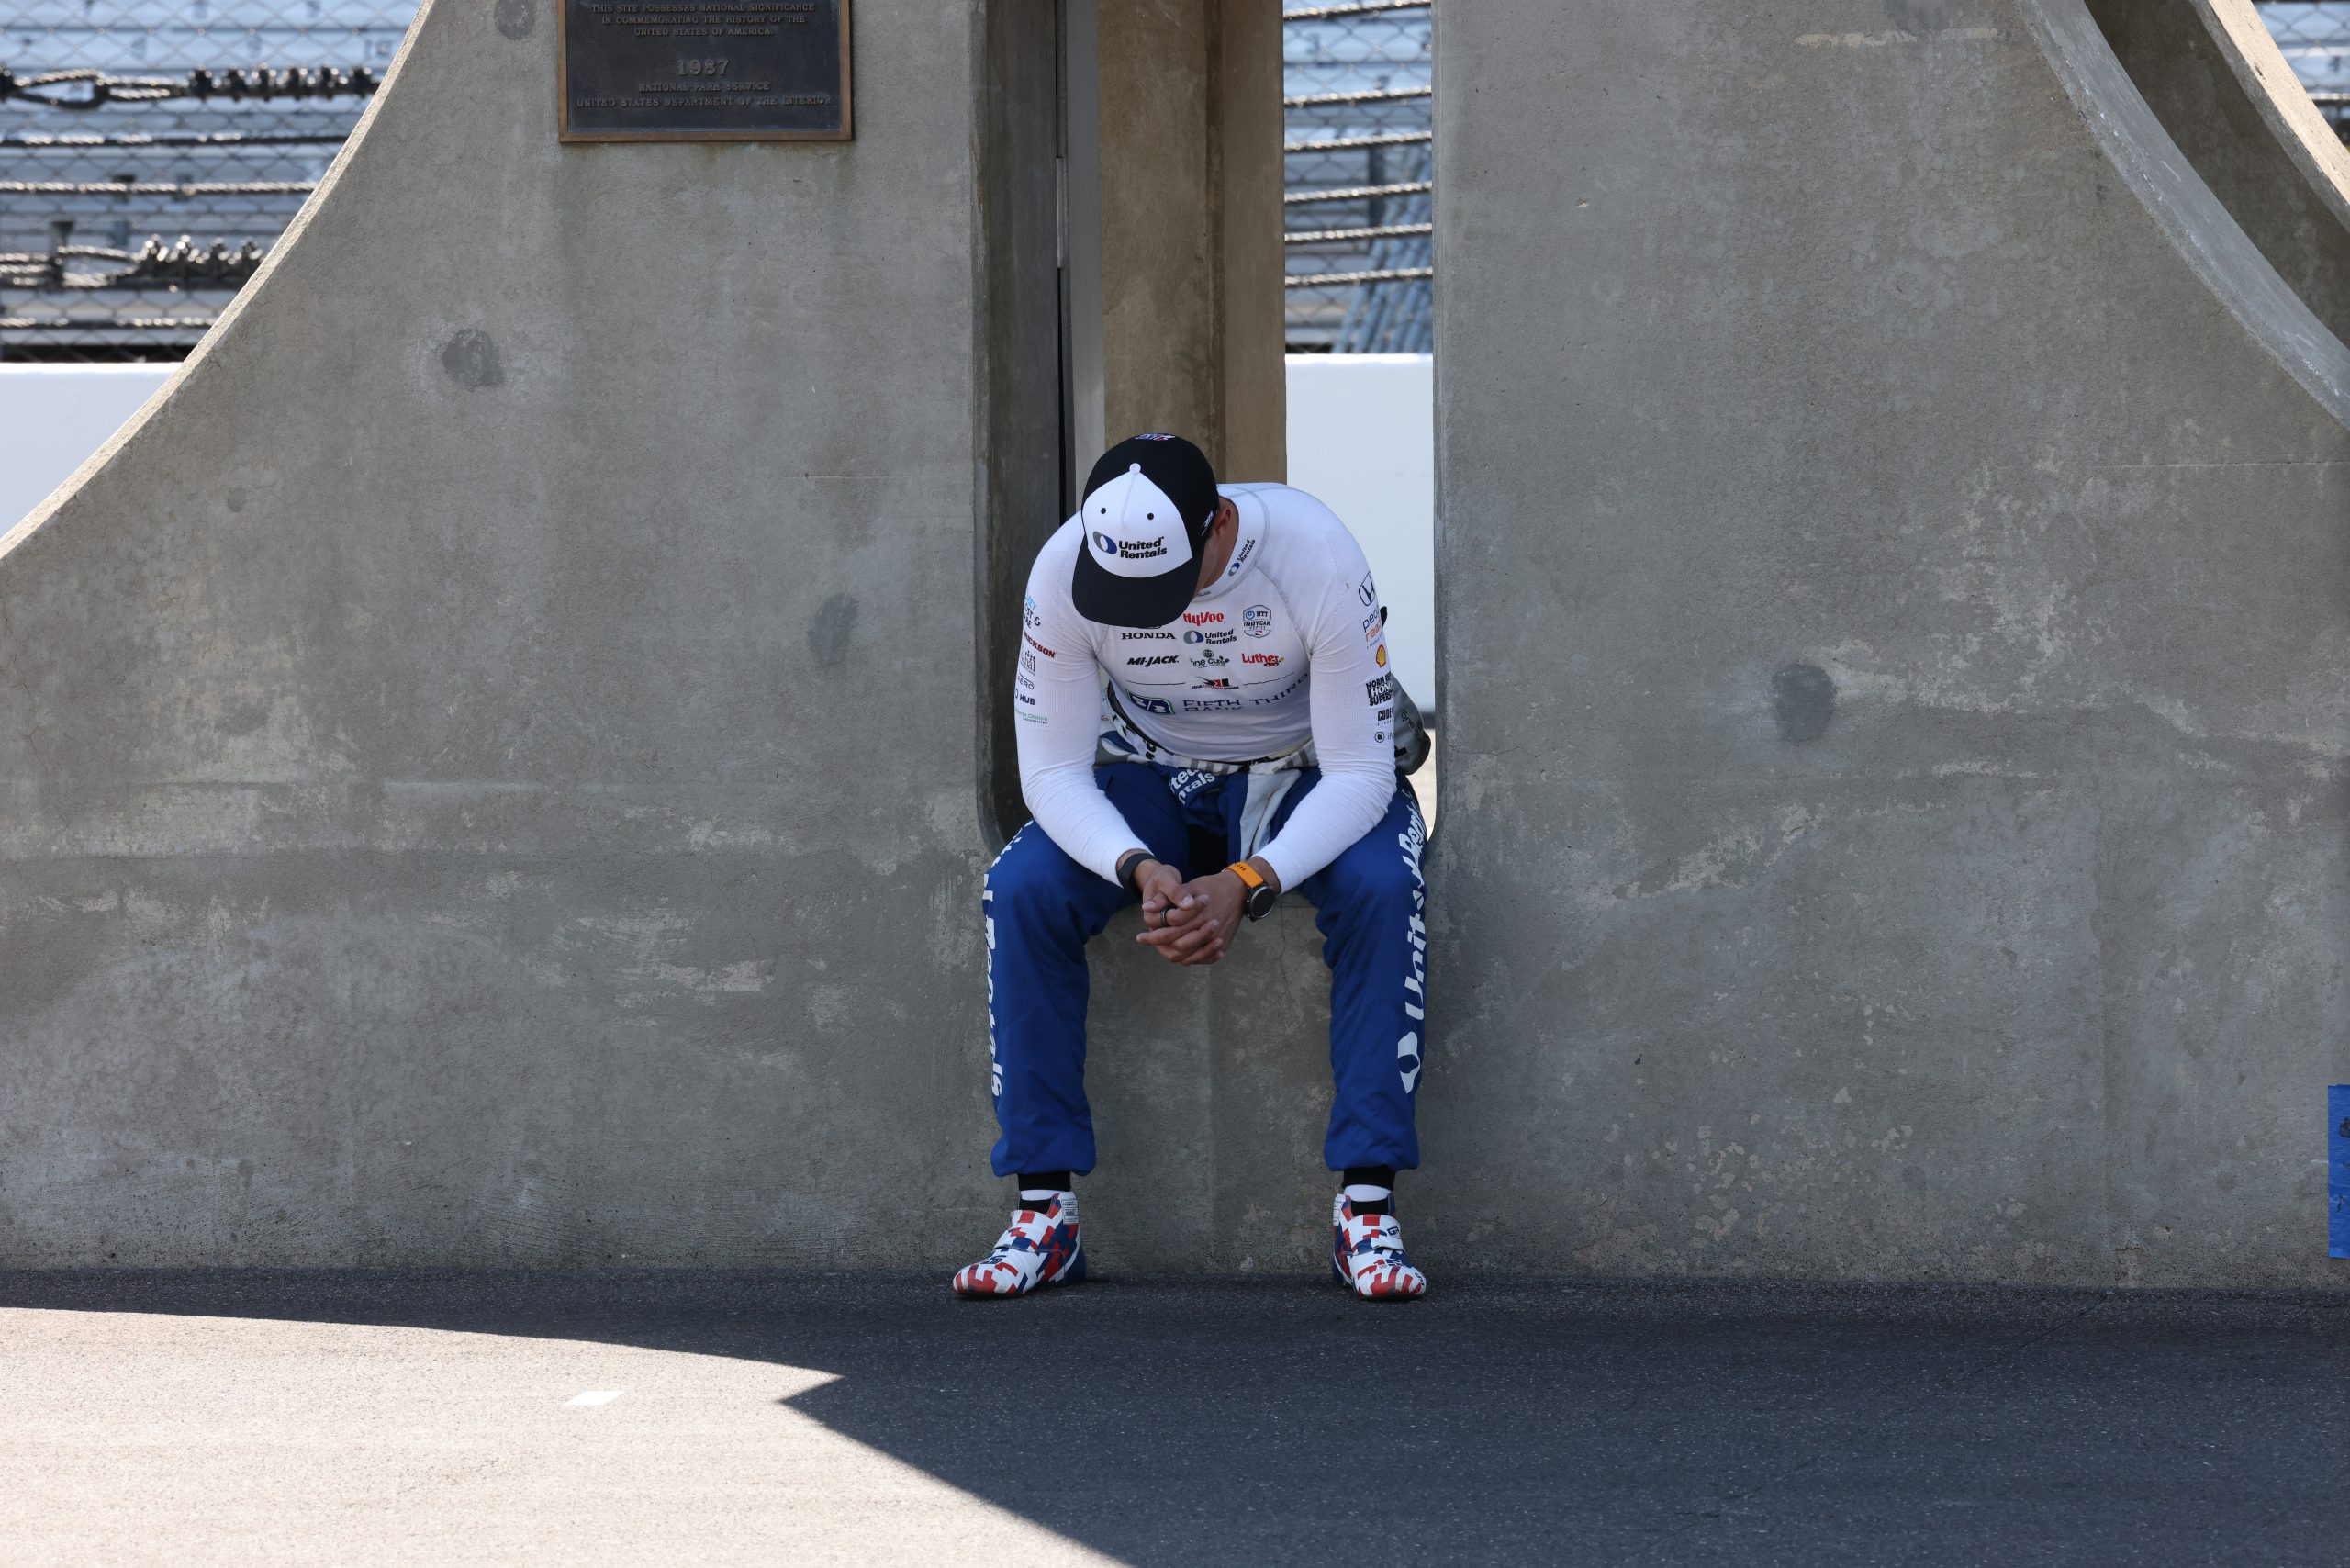 Graham Rahal reflects on missing the 107th Indianapolis 500. (Photo: Luis Torres | The Podium Finish)